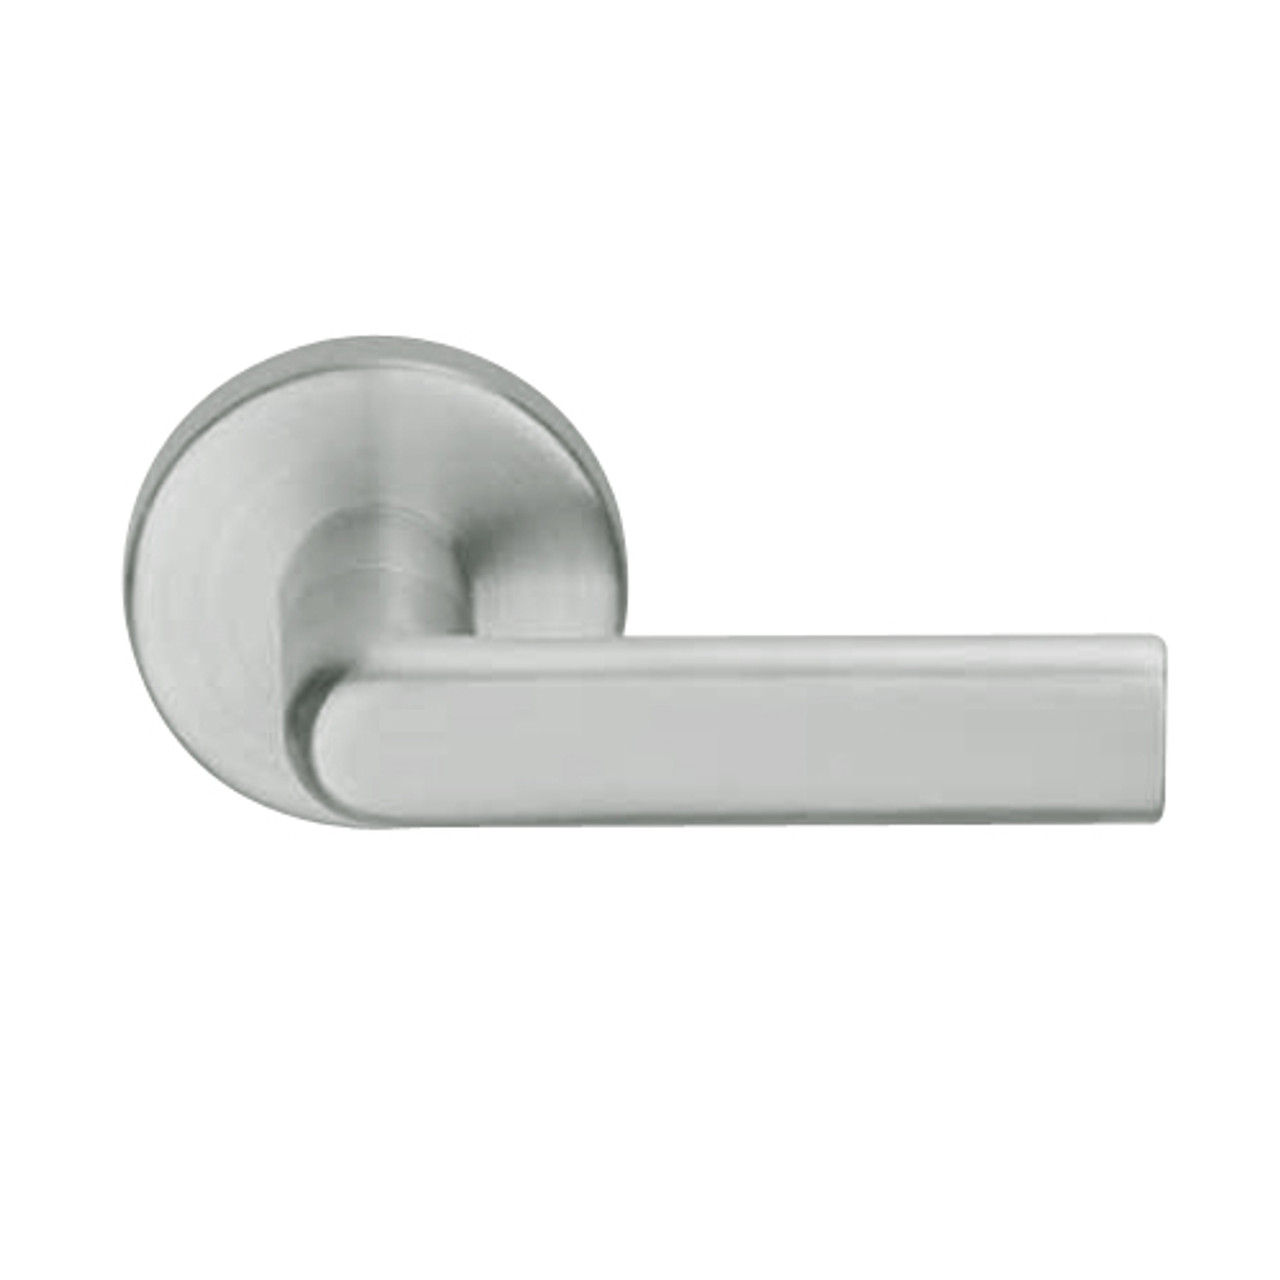 L9453L-01B-619 Schlage L Series Less Cylinder Entrance with Deadbolt Commercial Mortise Lock with 01 Cast Lever Design in Satin Nickel